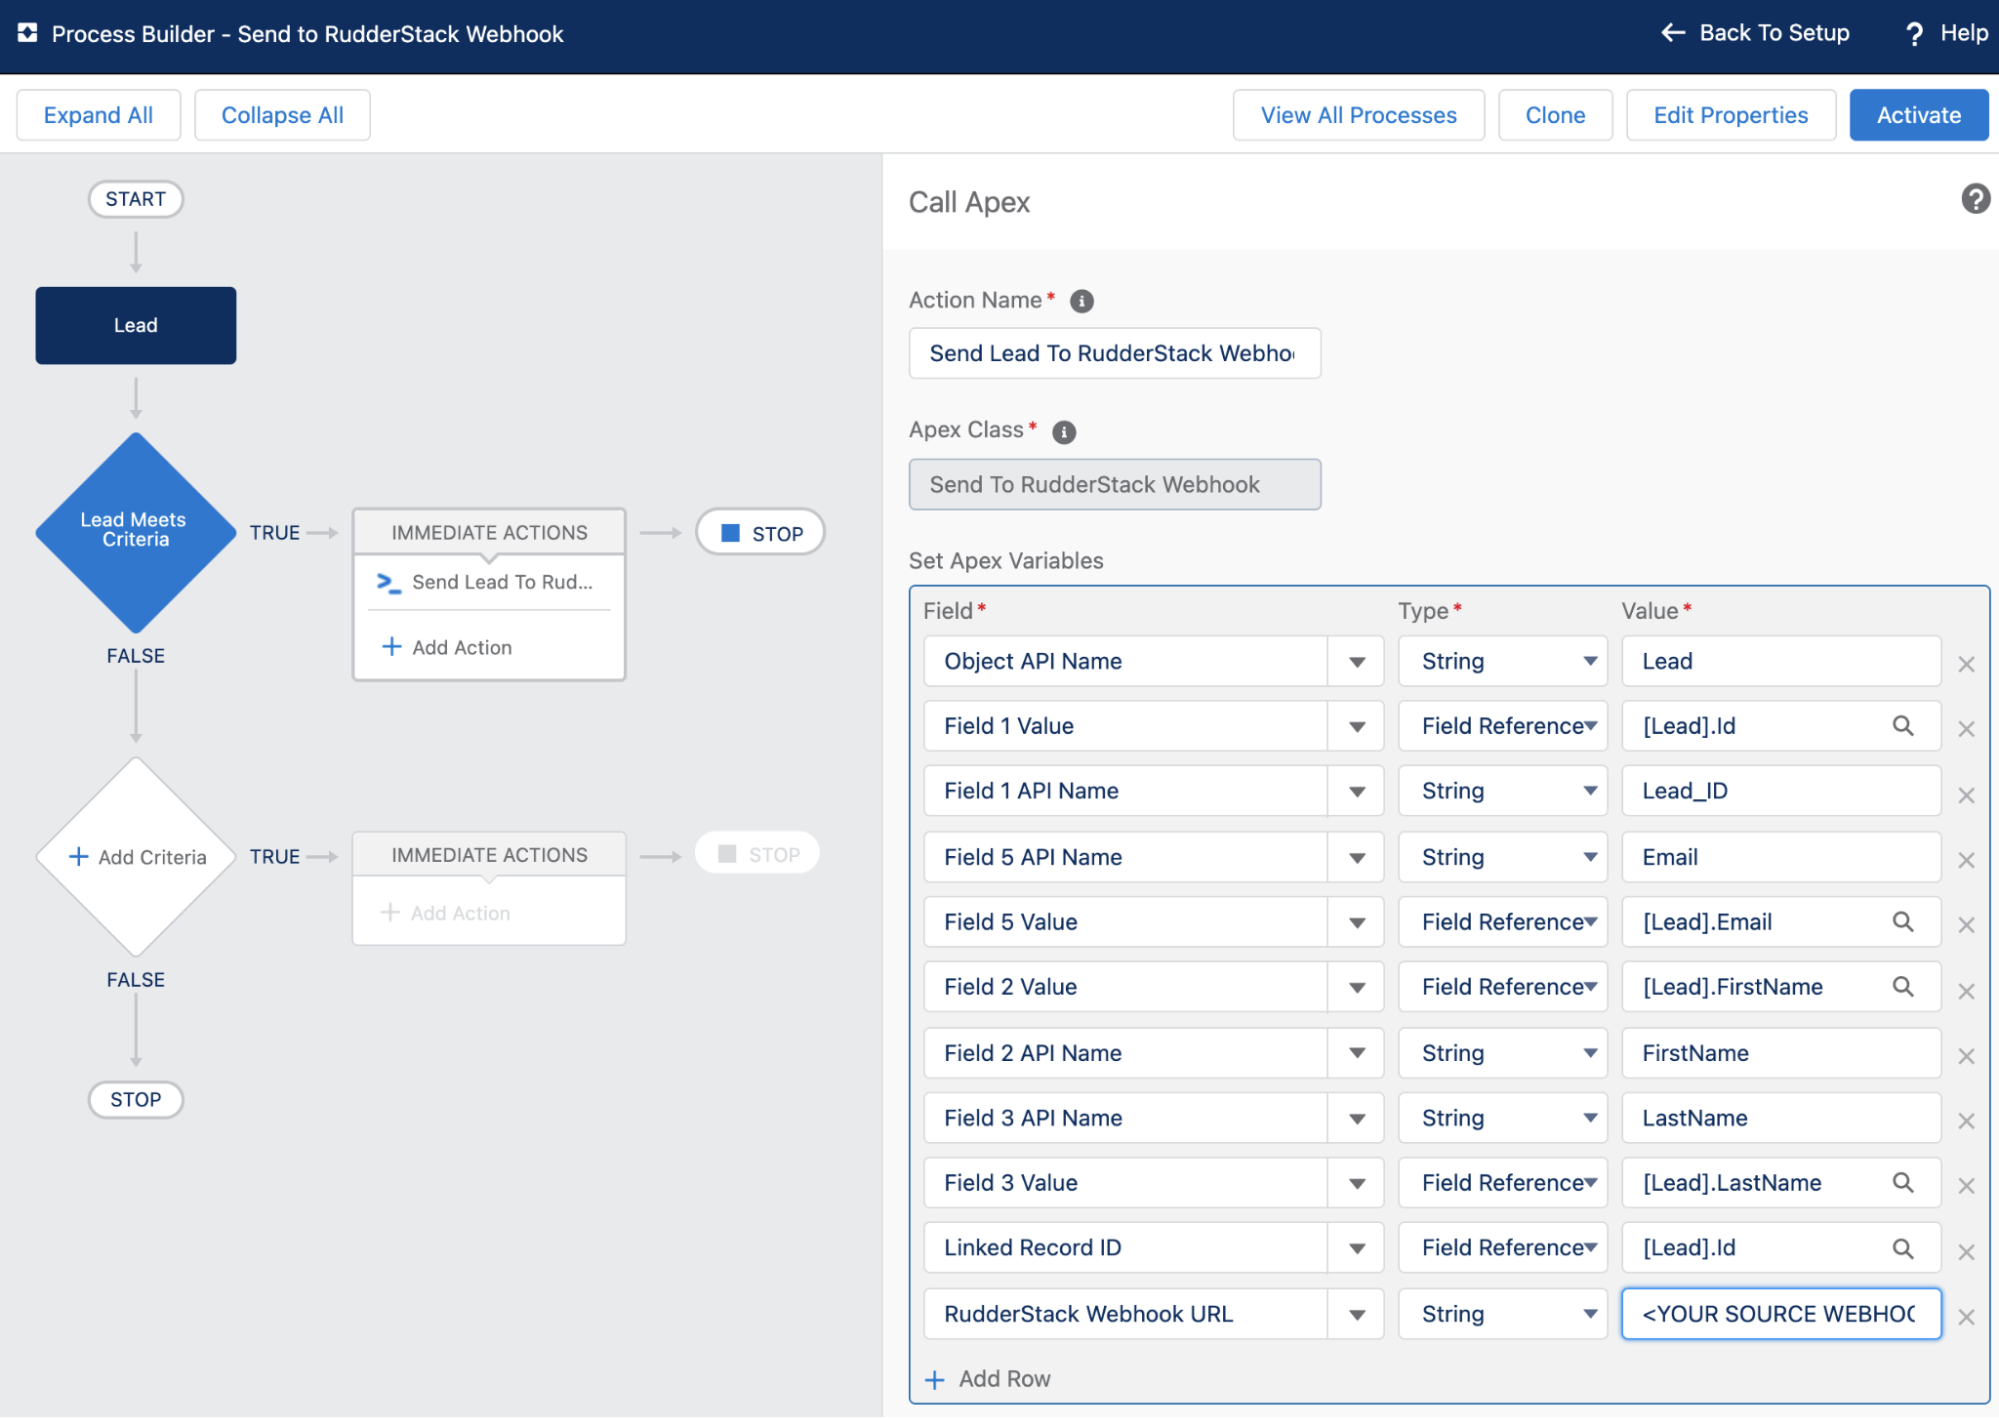 Salesforce Process Builder Immediate Action Call Apex - Send Lead To RudderStack Window Field Mapping screen